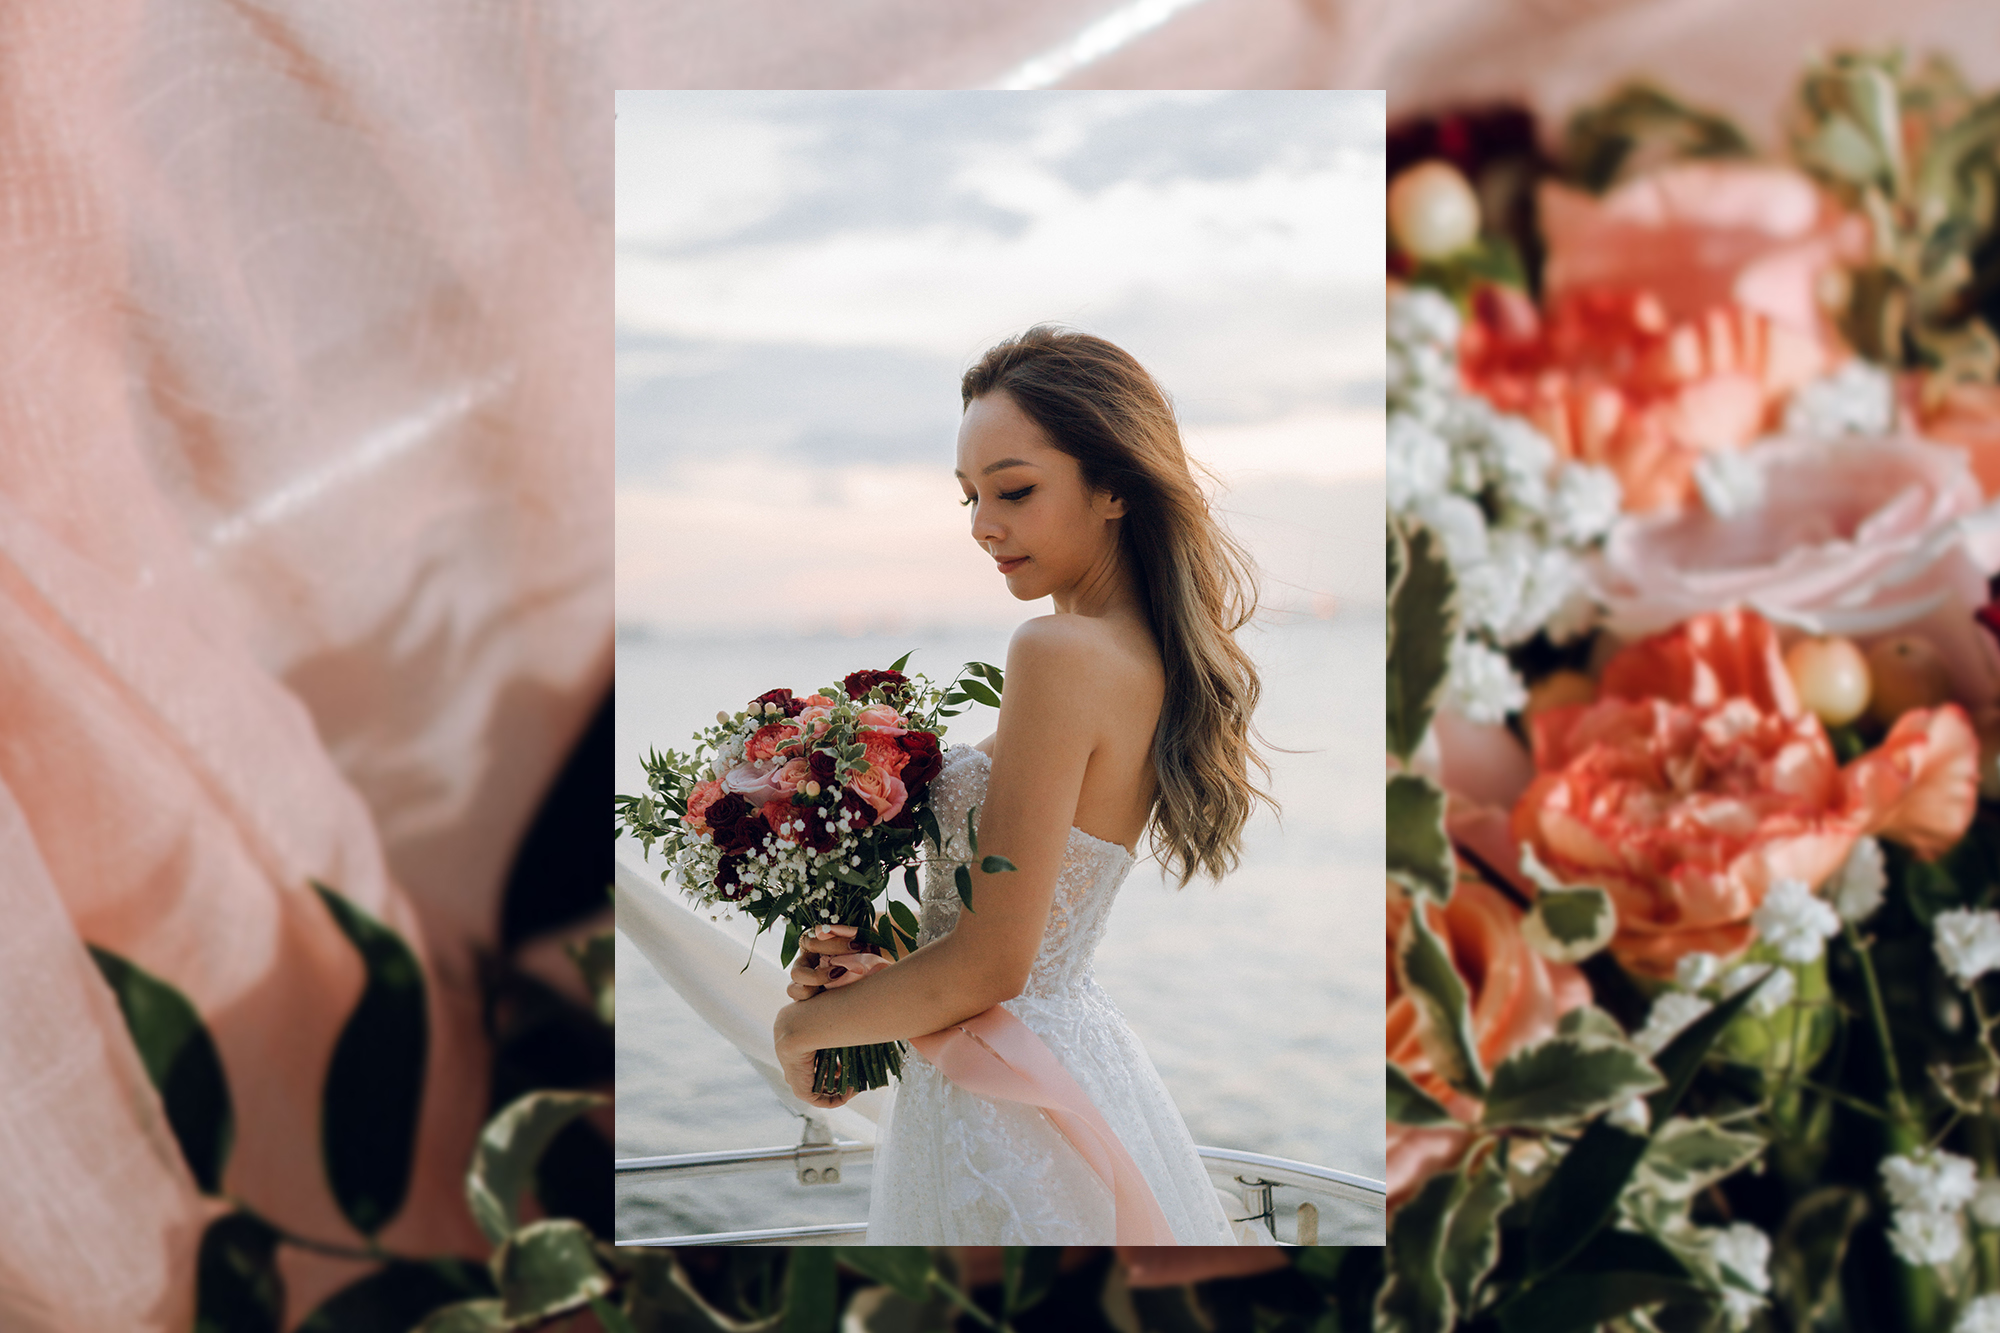 Sunset Prewedding Photoshoot On A Yacht With Romantic Floral Styling by Samantha on OneThreeOneFour 27